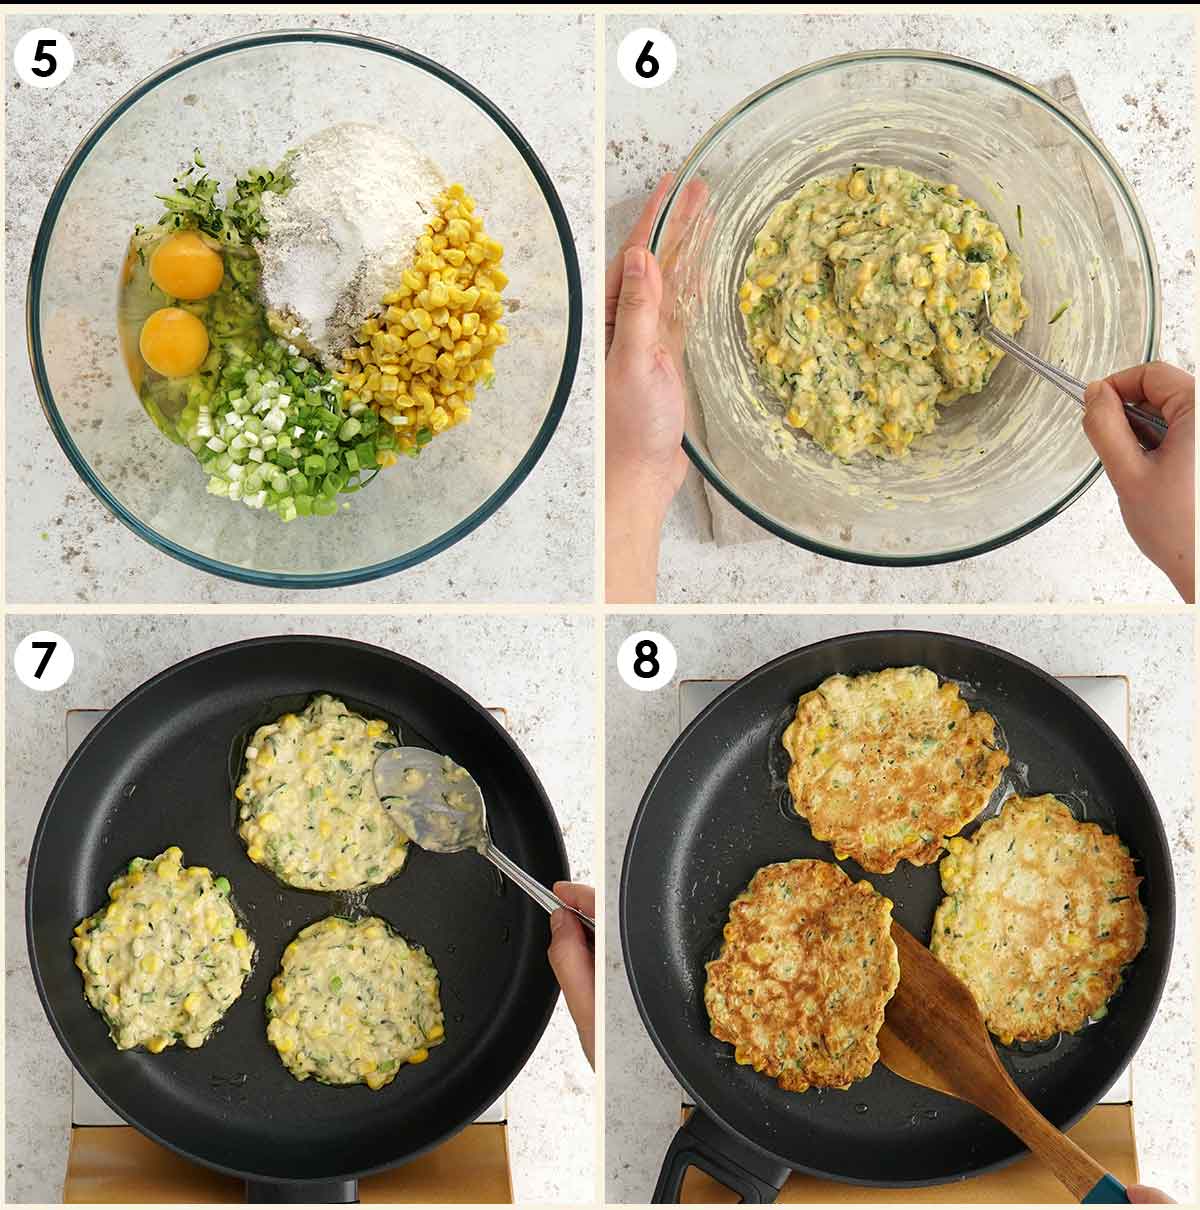 4 image collage showing how to mix the batter and how to pan fry the fritters. 